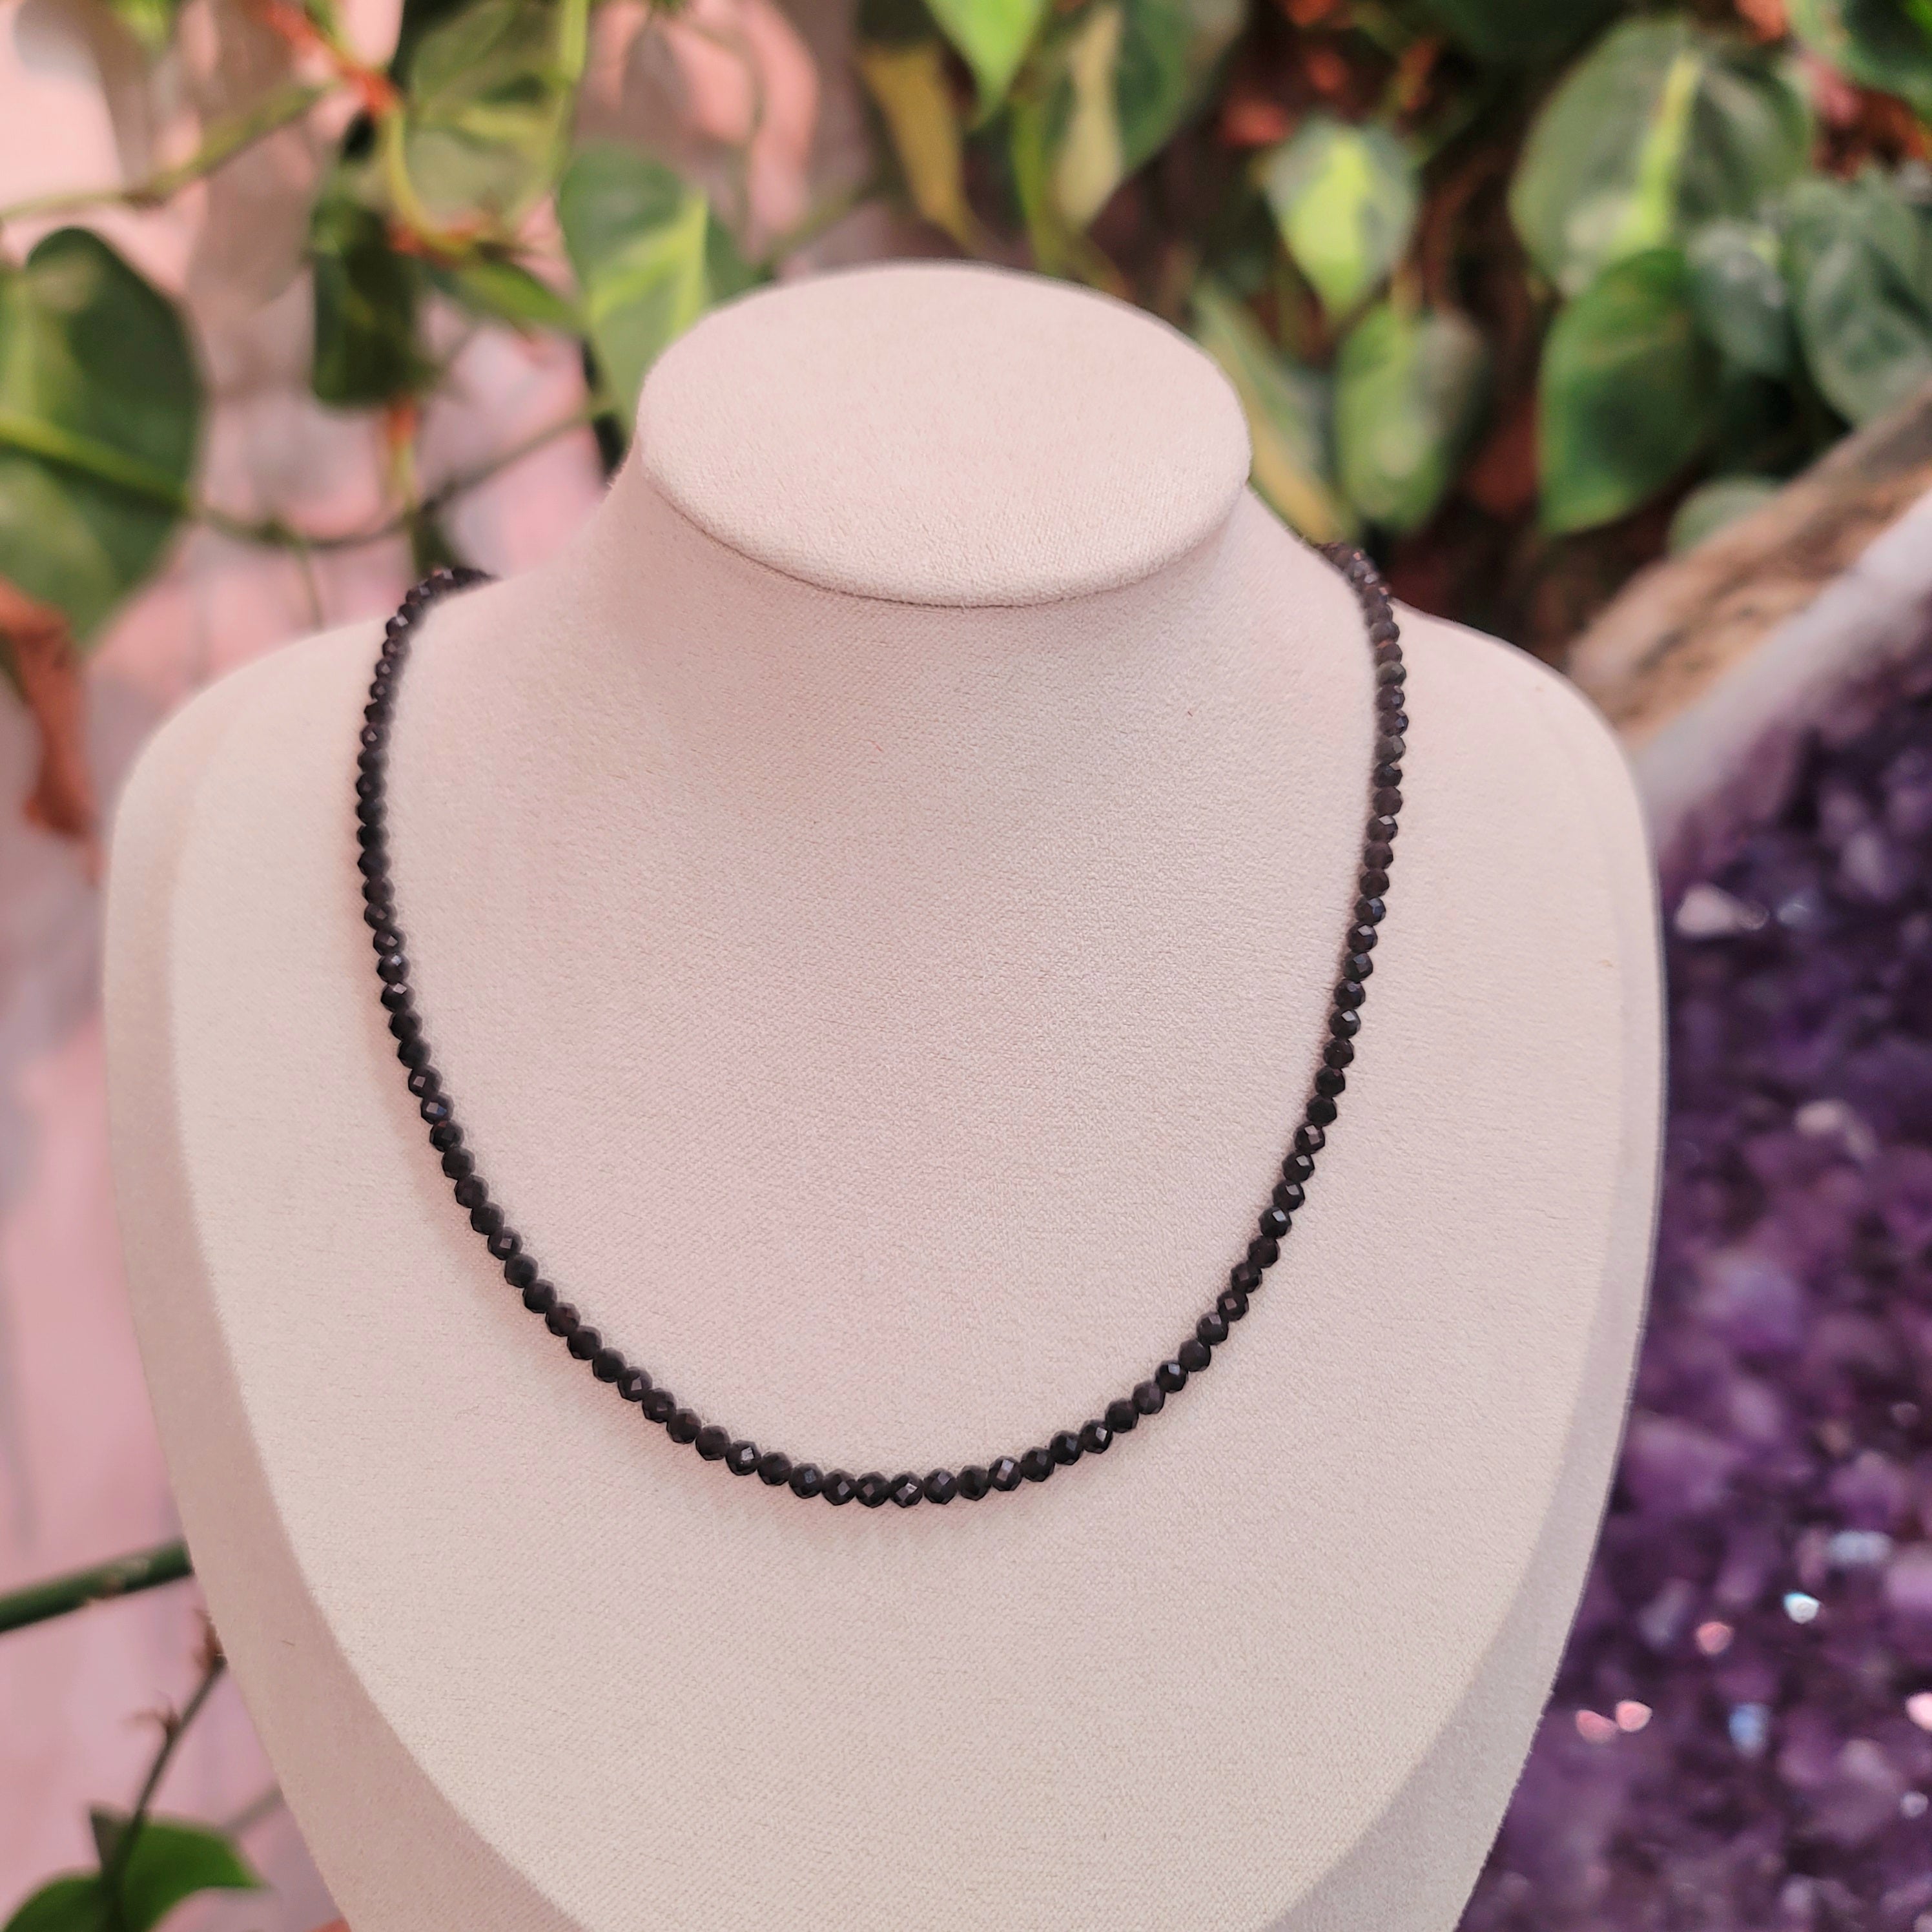 Black Moonstone Faceted Necklace for New Beginnings and Protection